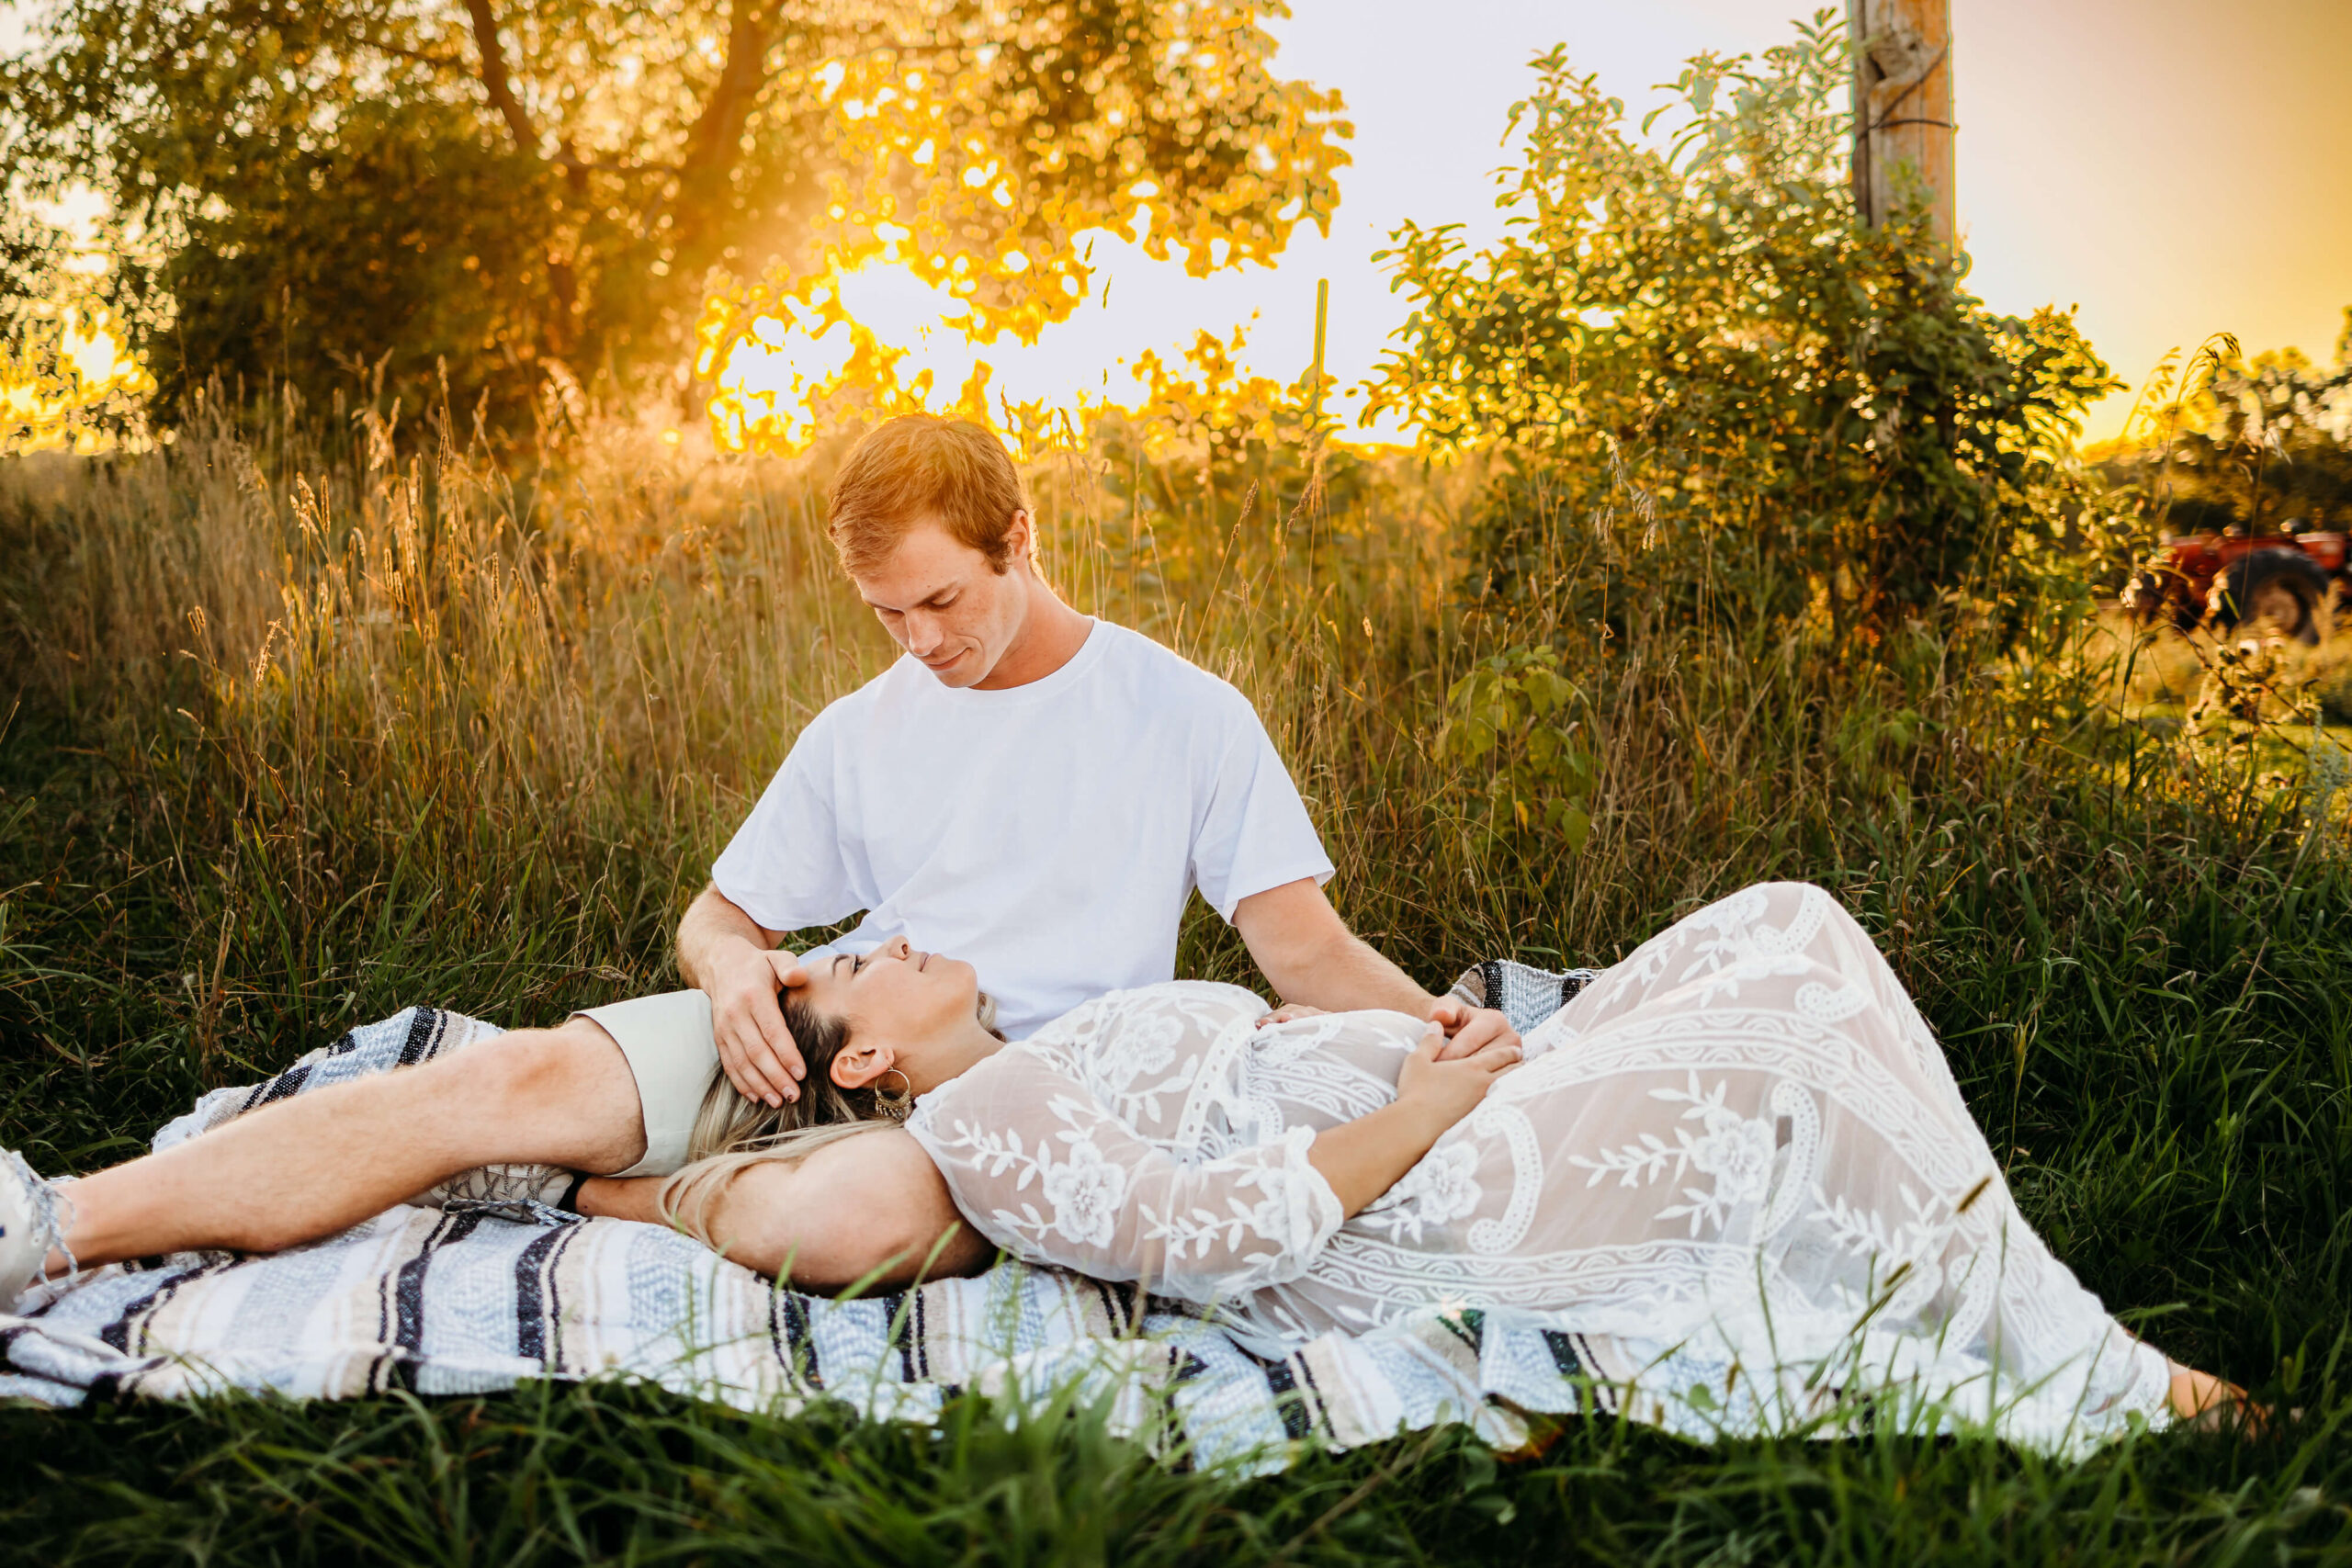 A mom to be in an embroidered maternity dress lays in the lap of her husband on a picnic blanket at sunset